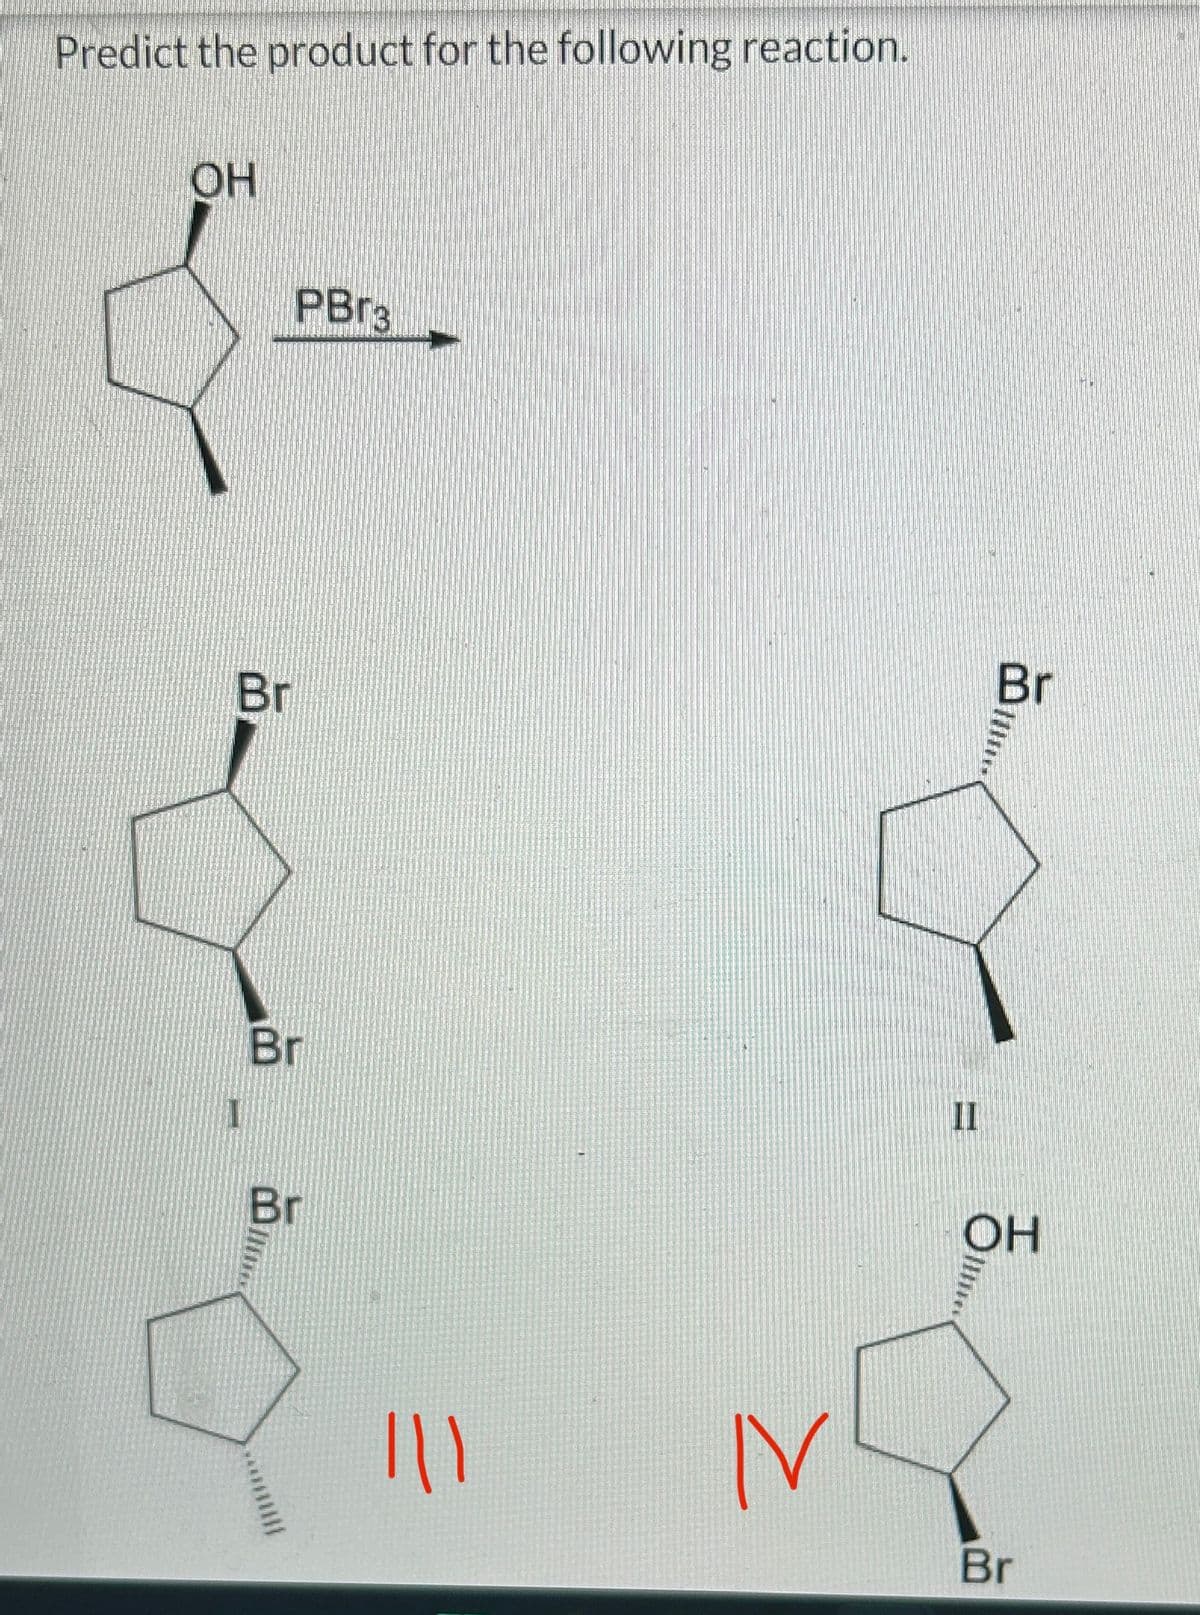 Predict the product for the following reaction.
OH
Br
PBr3
Br
Br
|||
N
II
Br
OH
Br